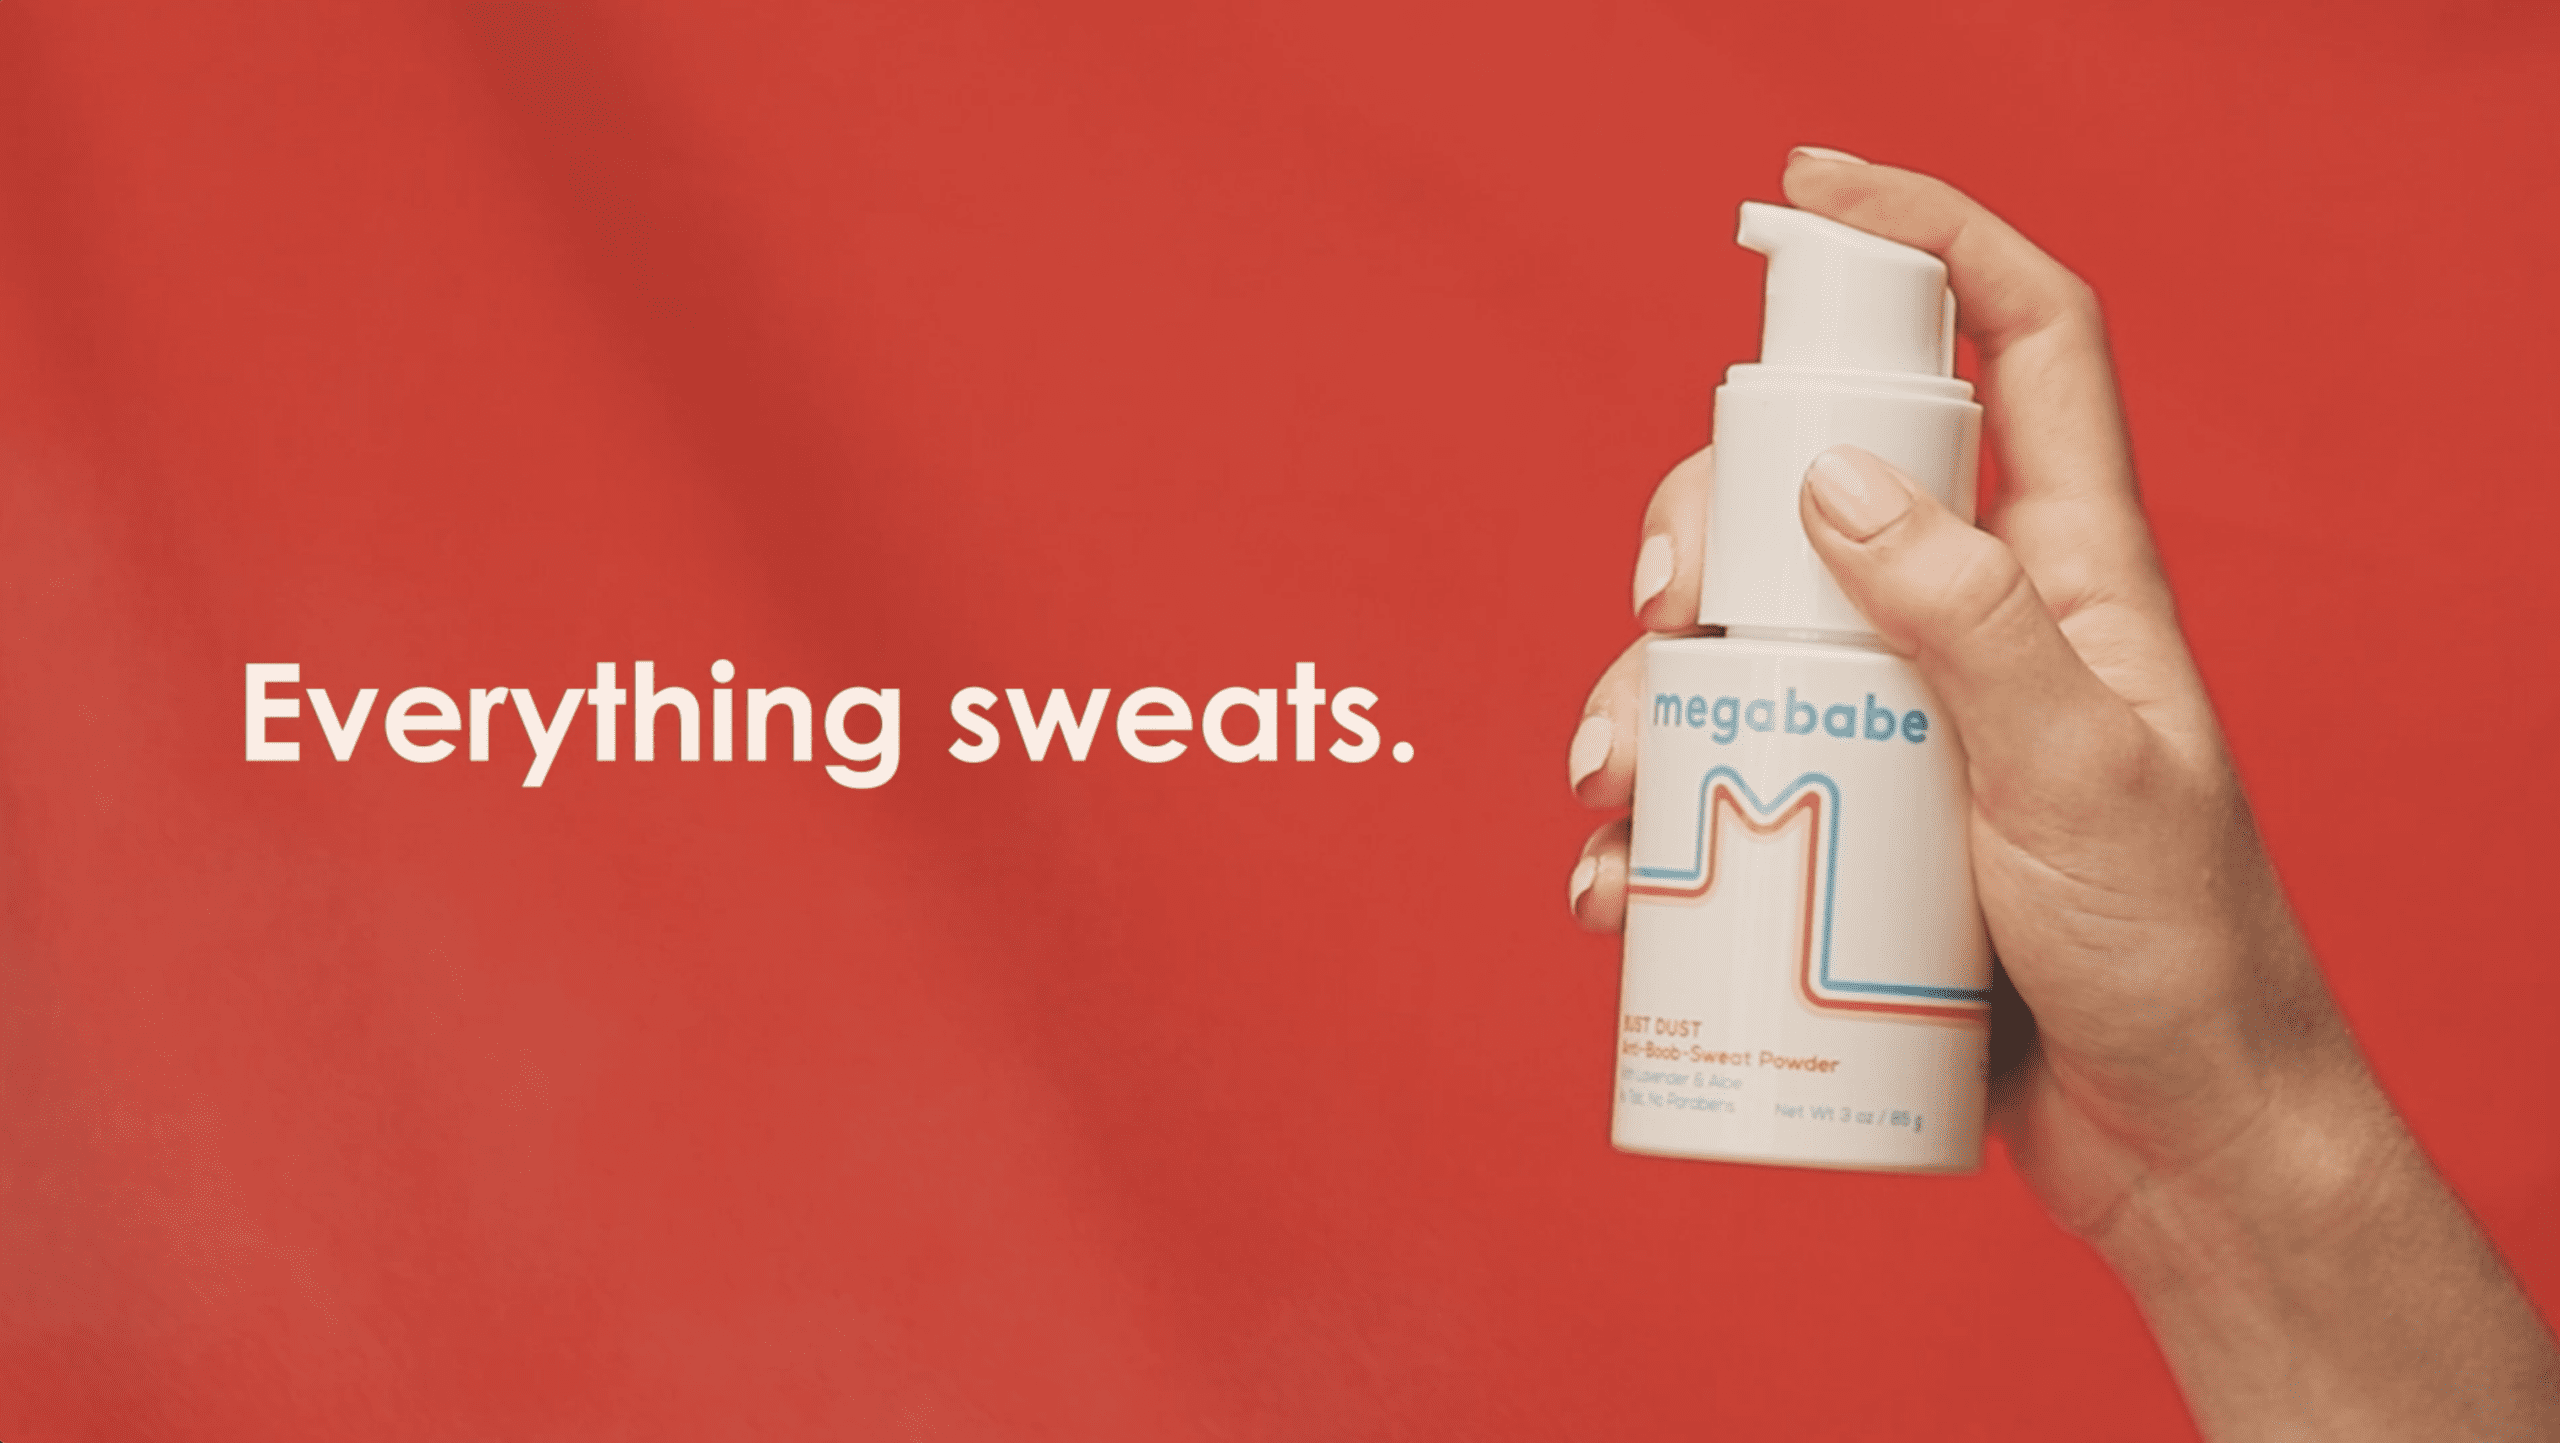 An advertisement depicting a hand against a red backdrop holding a white bottle. The bottle has two orange and blue stripes in the shape of an M on the front, below the word "Megababe" written in blue text. To the left is the phrase "Everything sweats" written in white.